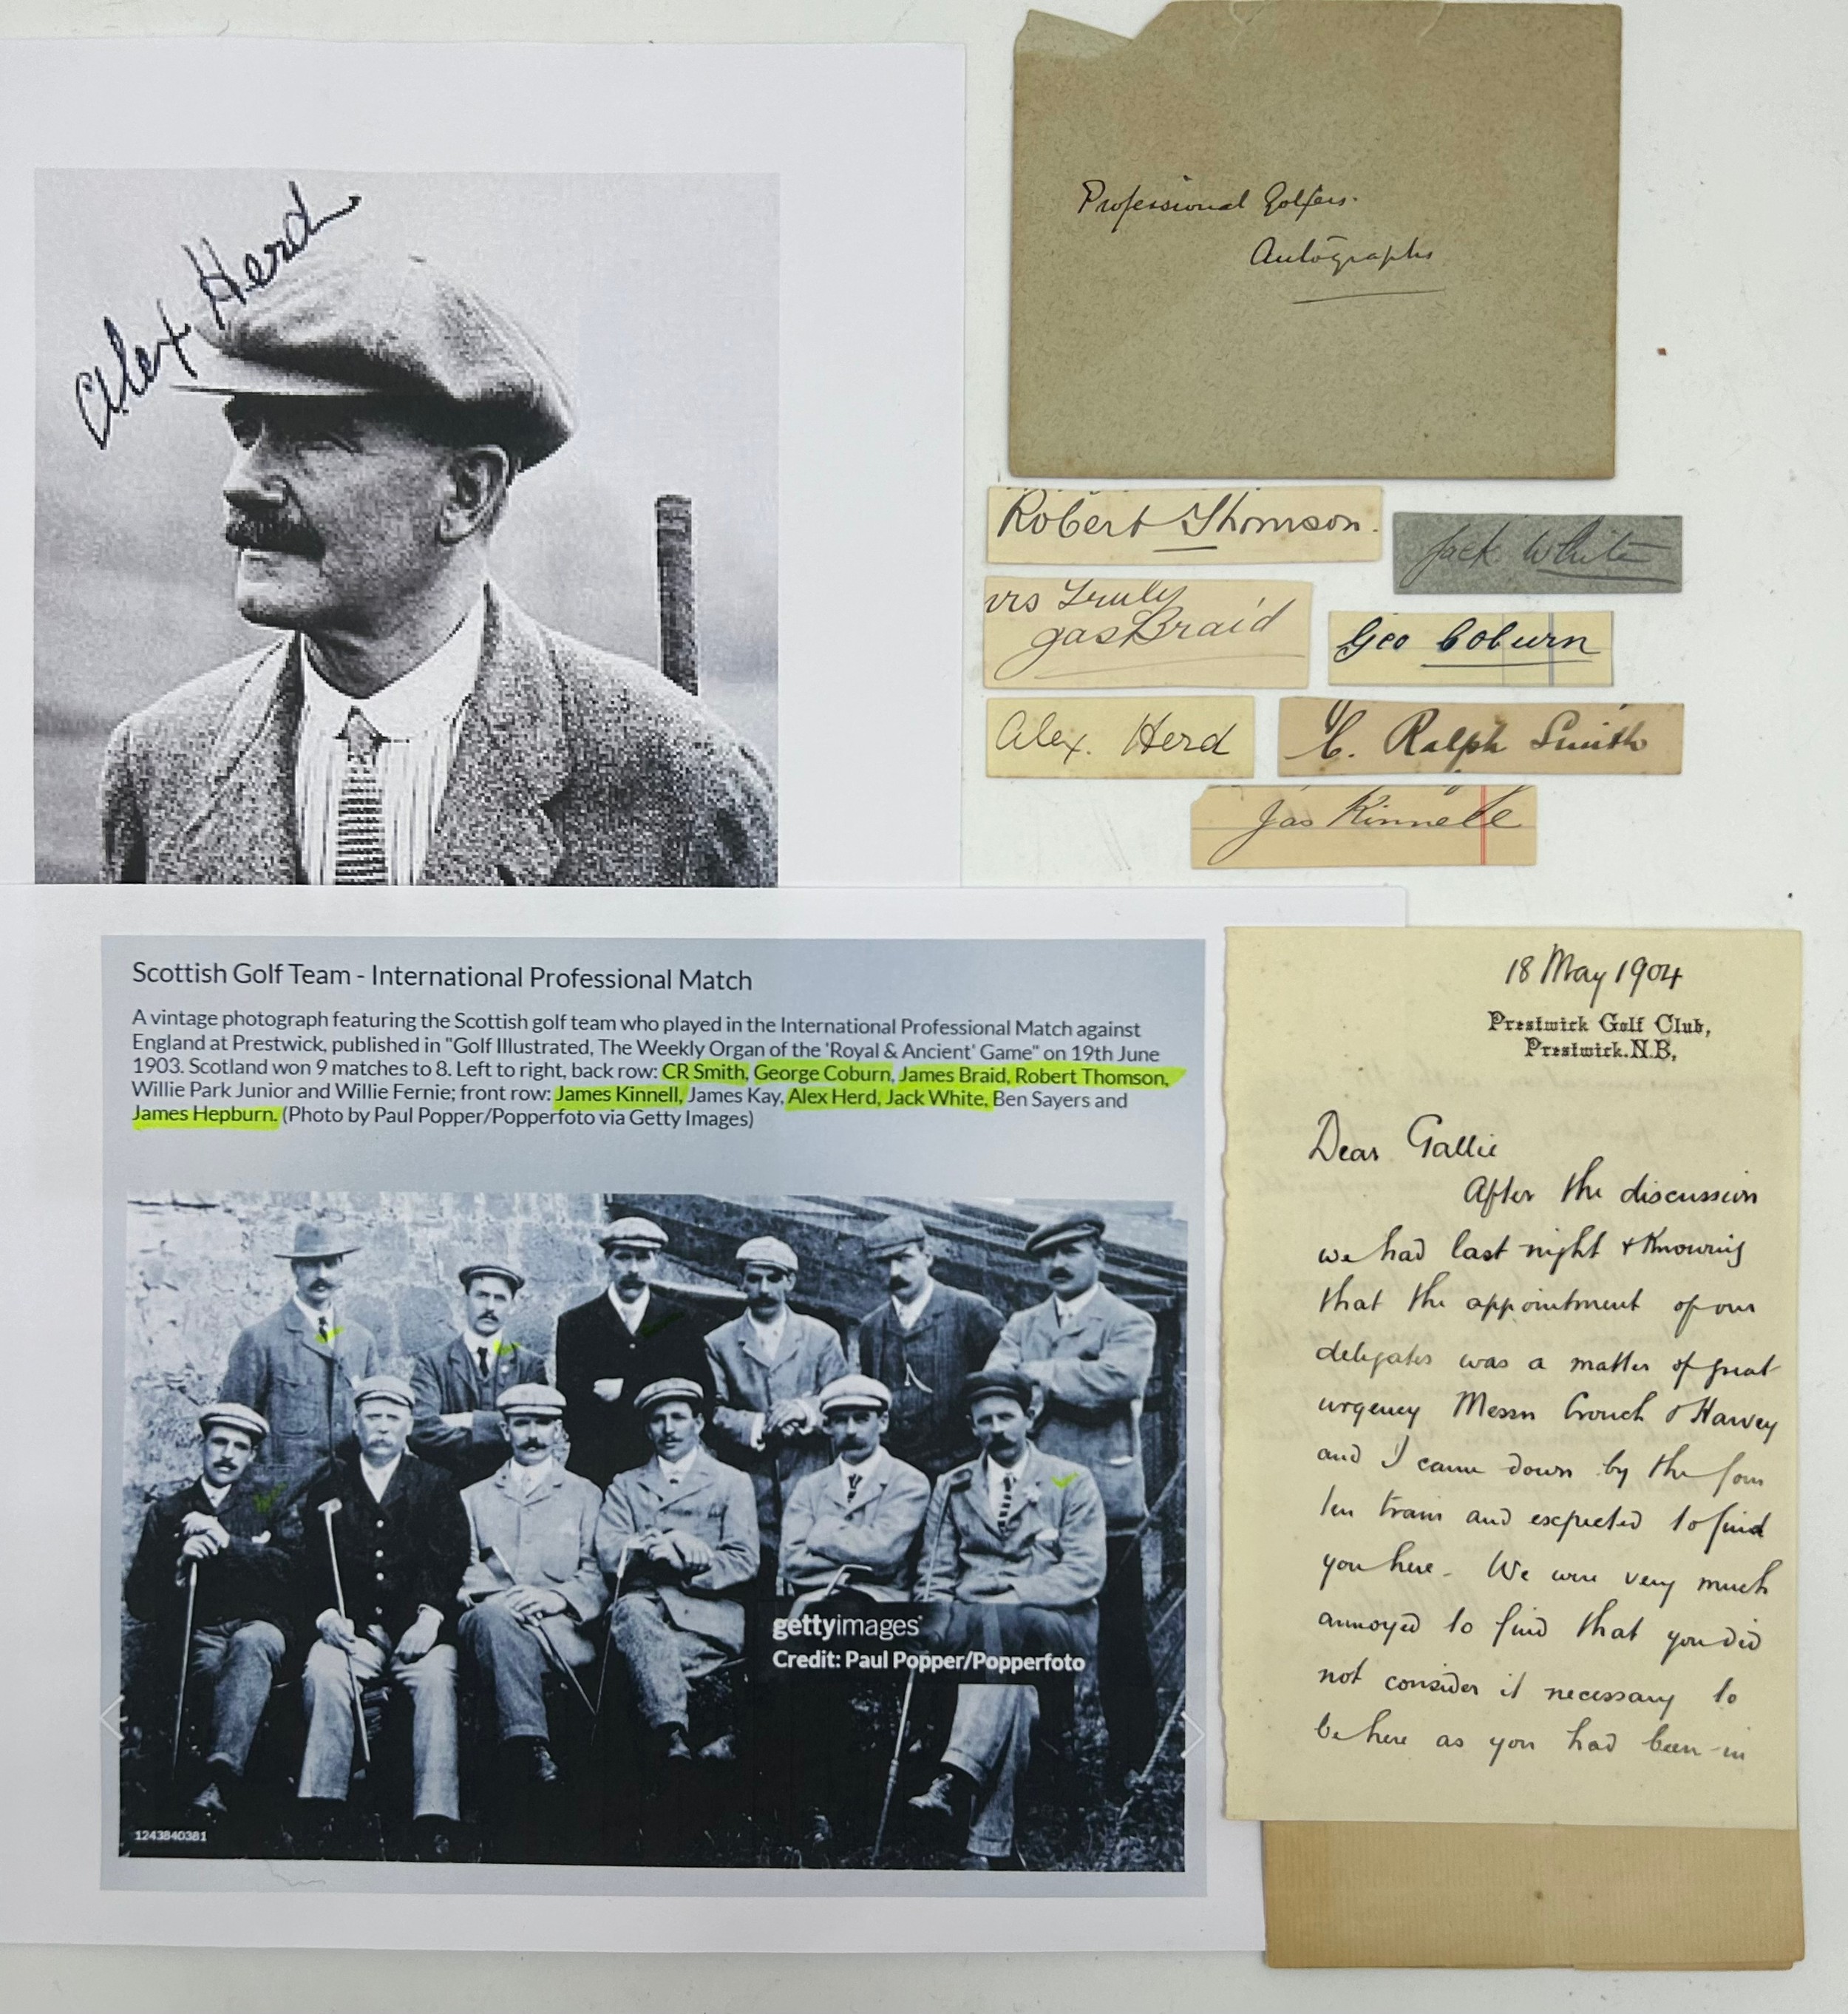 A Collection of Autographs and letters from The Scottish Golf Team 1903 match including C.Ralph